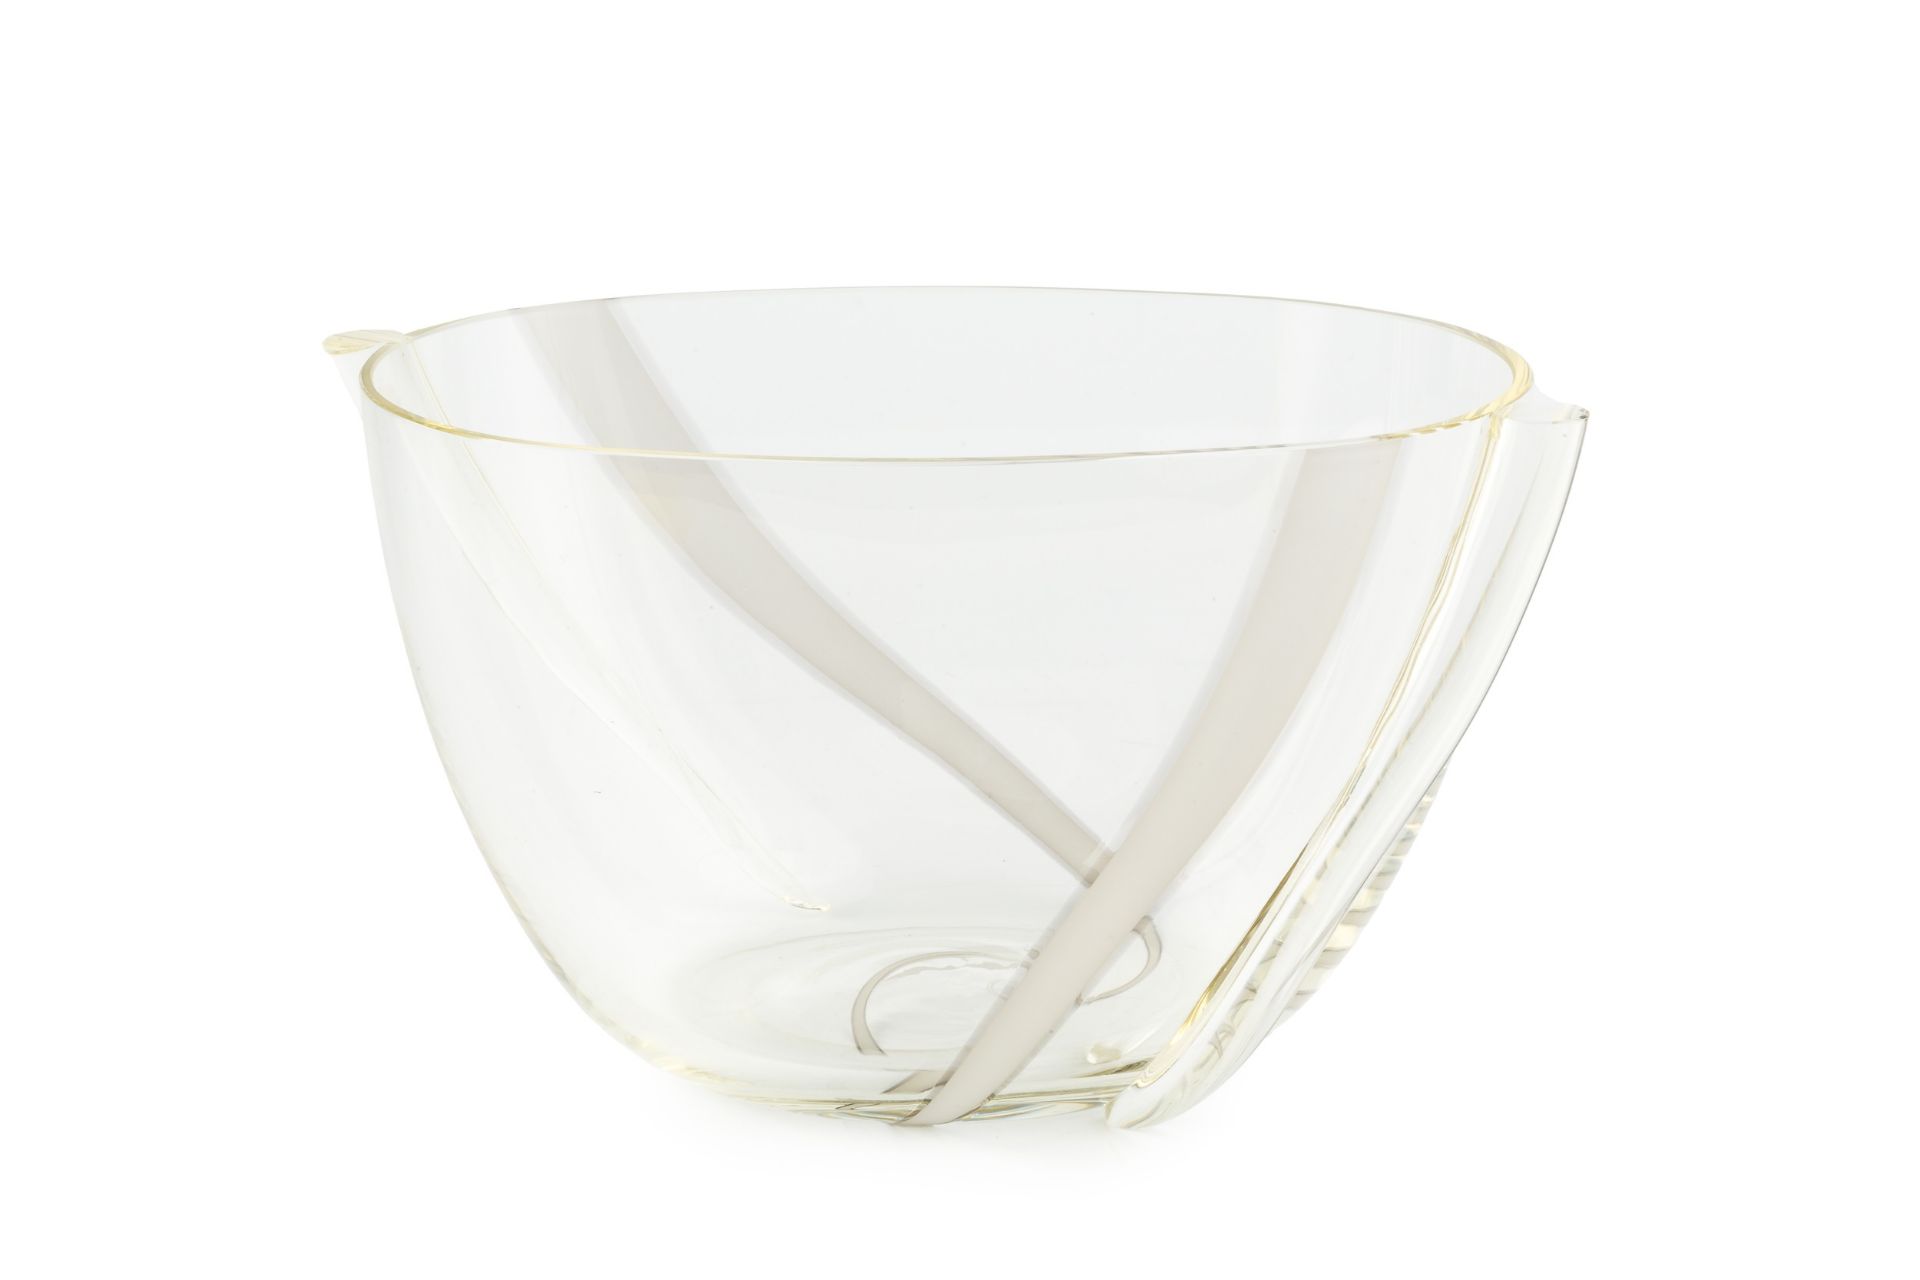 Licio Zanetti Murano glass bowl, 1986 clear glass with white stripes signed and dated 14cm high,